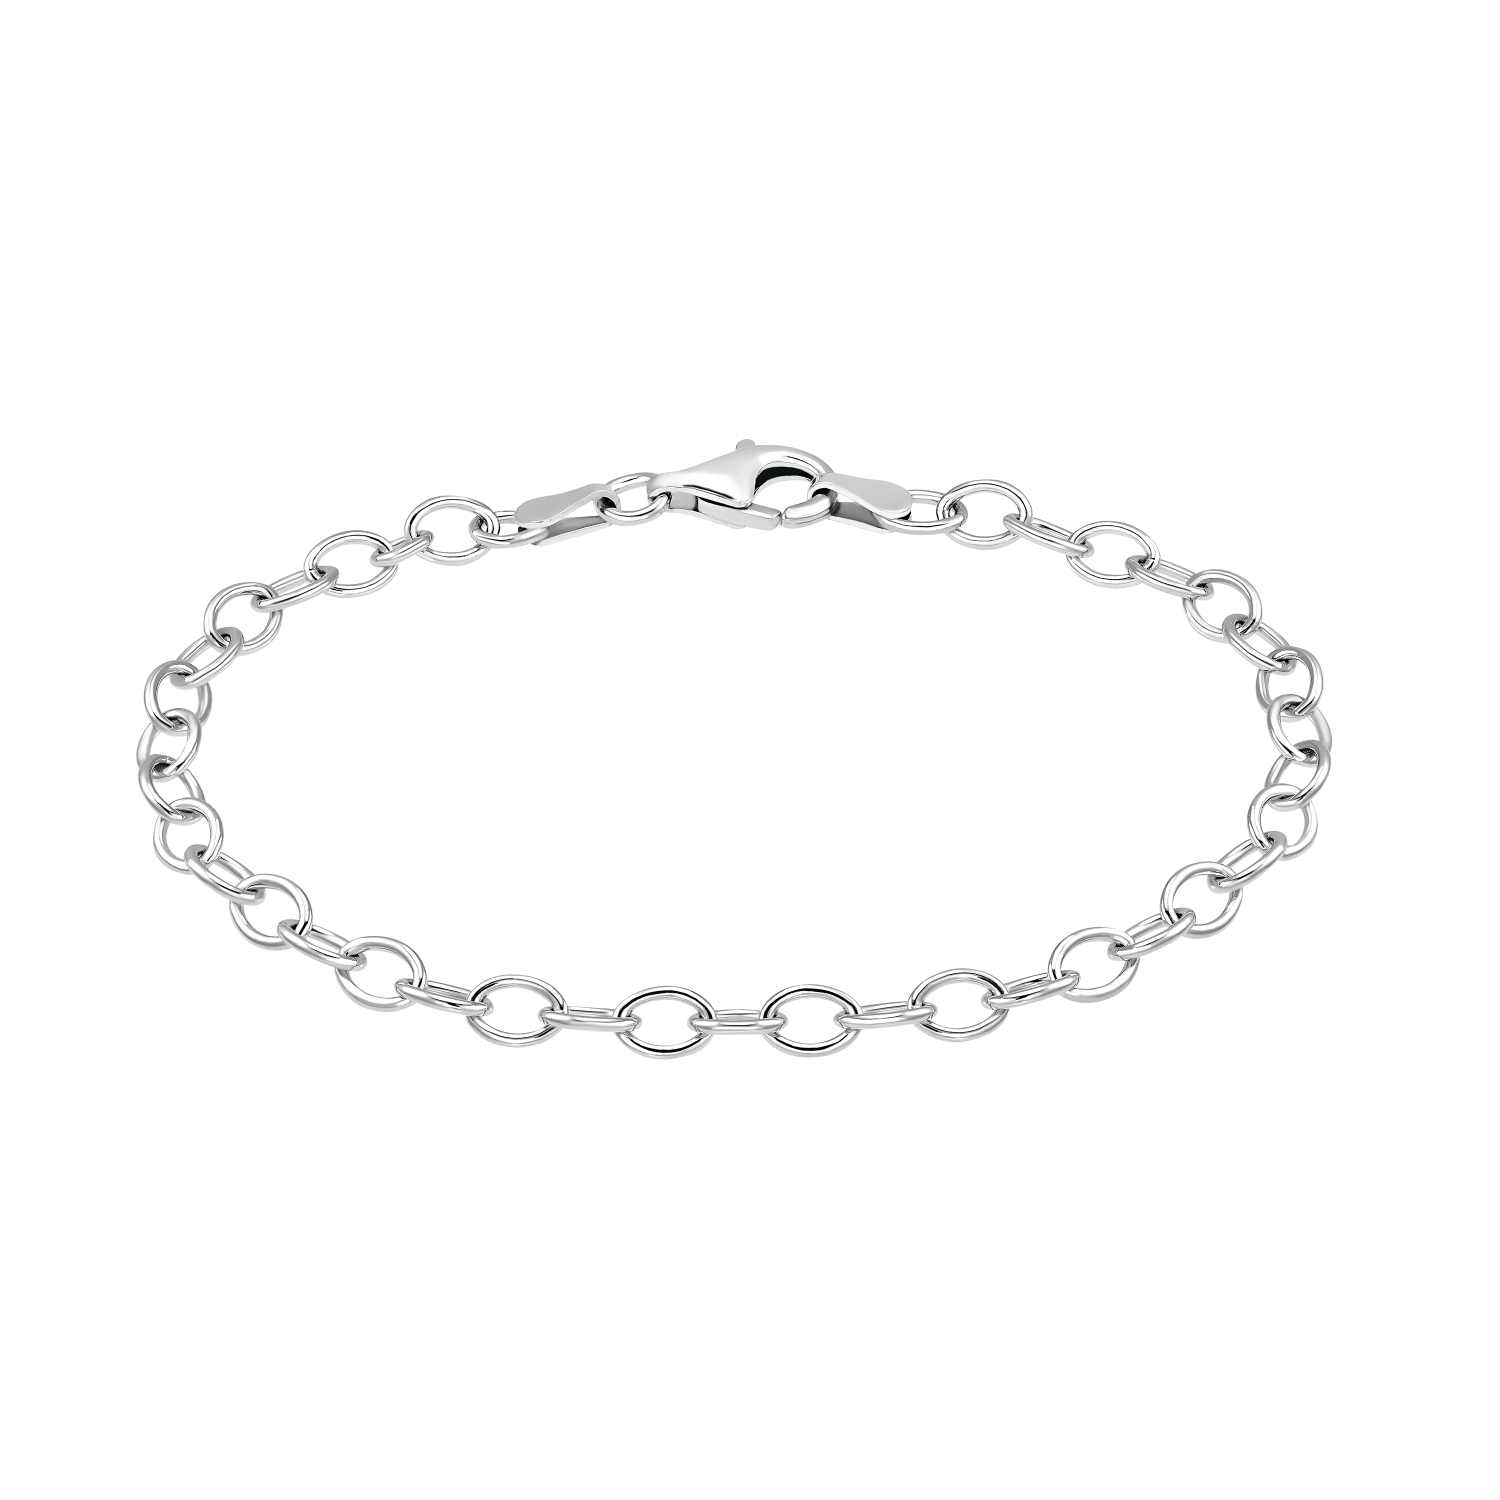 Charmarmband Unisex, 925 Sterling Silber